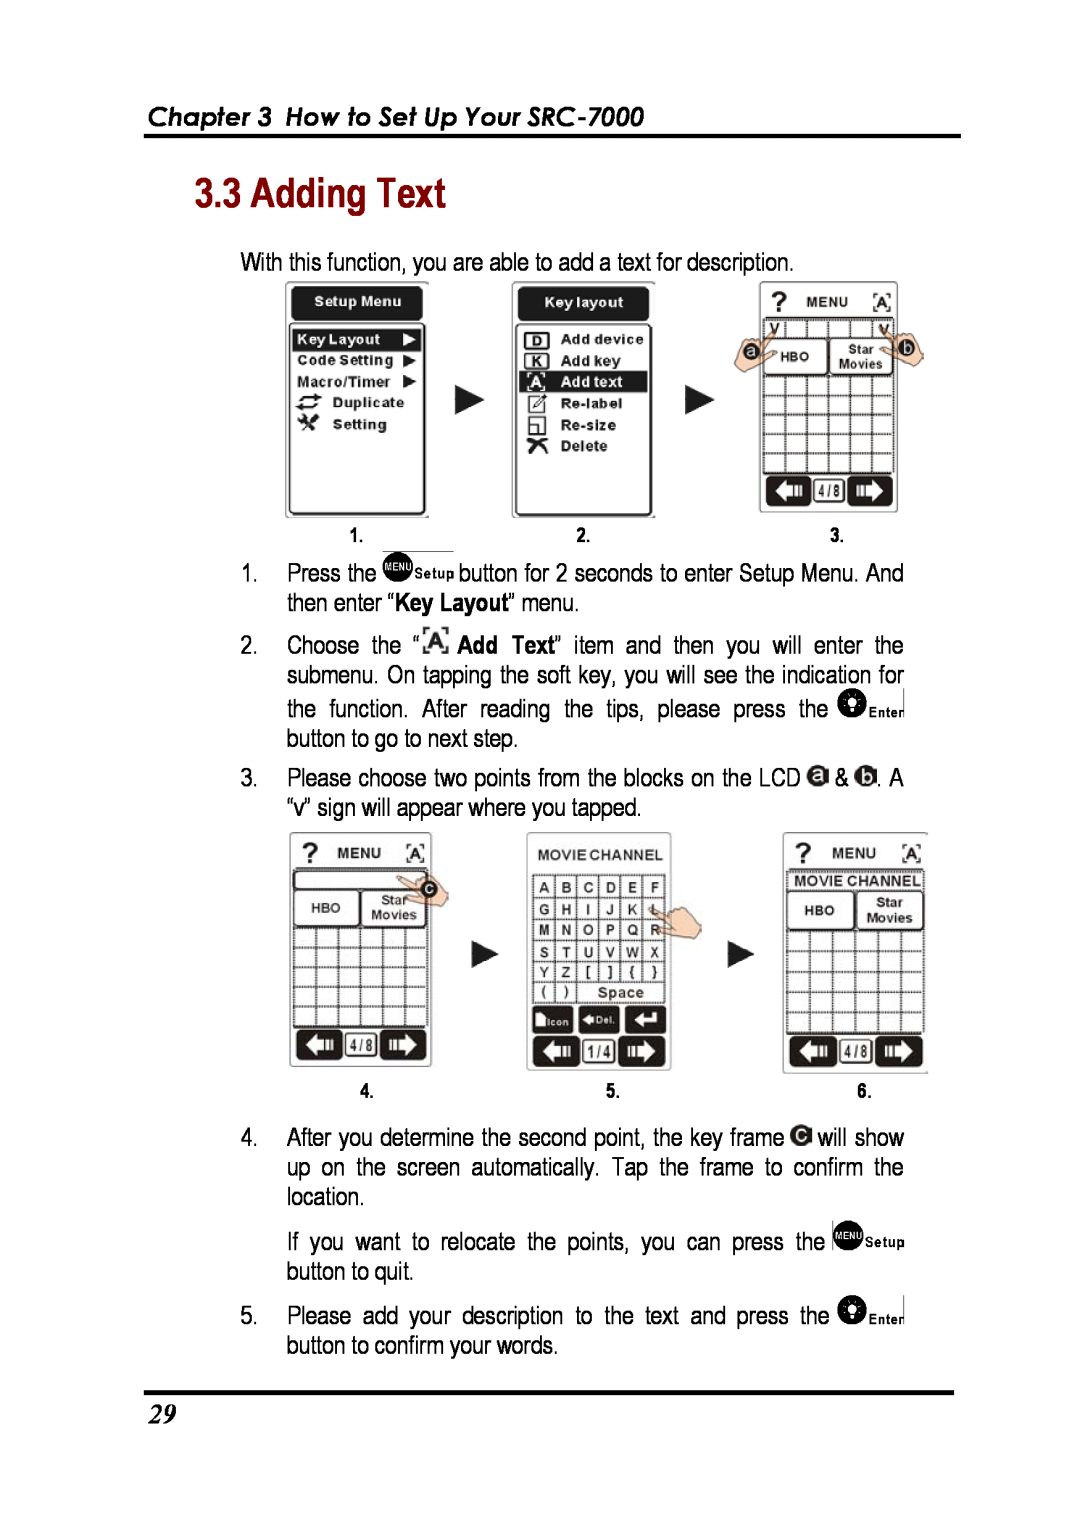 Sunwave Tech manual Adding Text, How to Set Up Your SRC-7000 